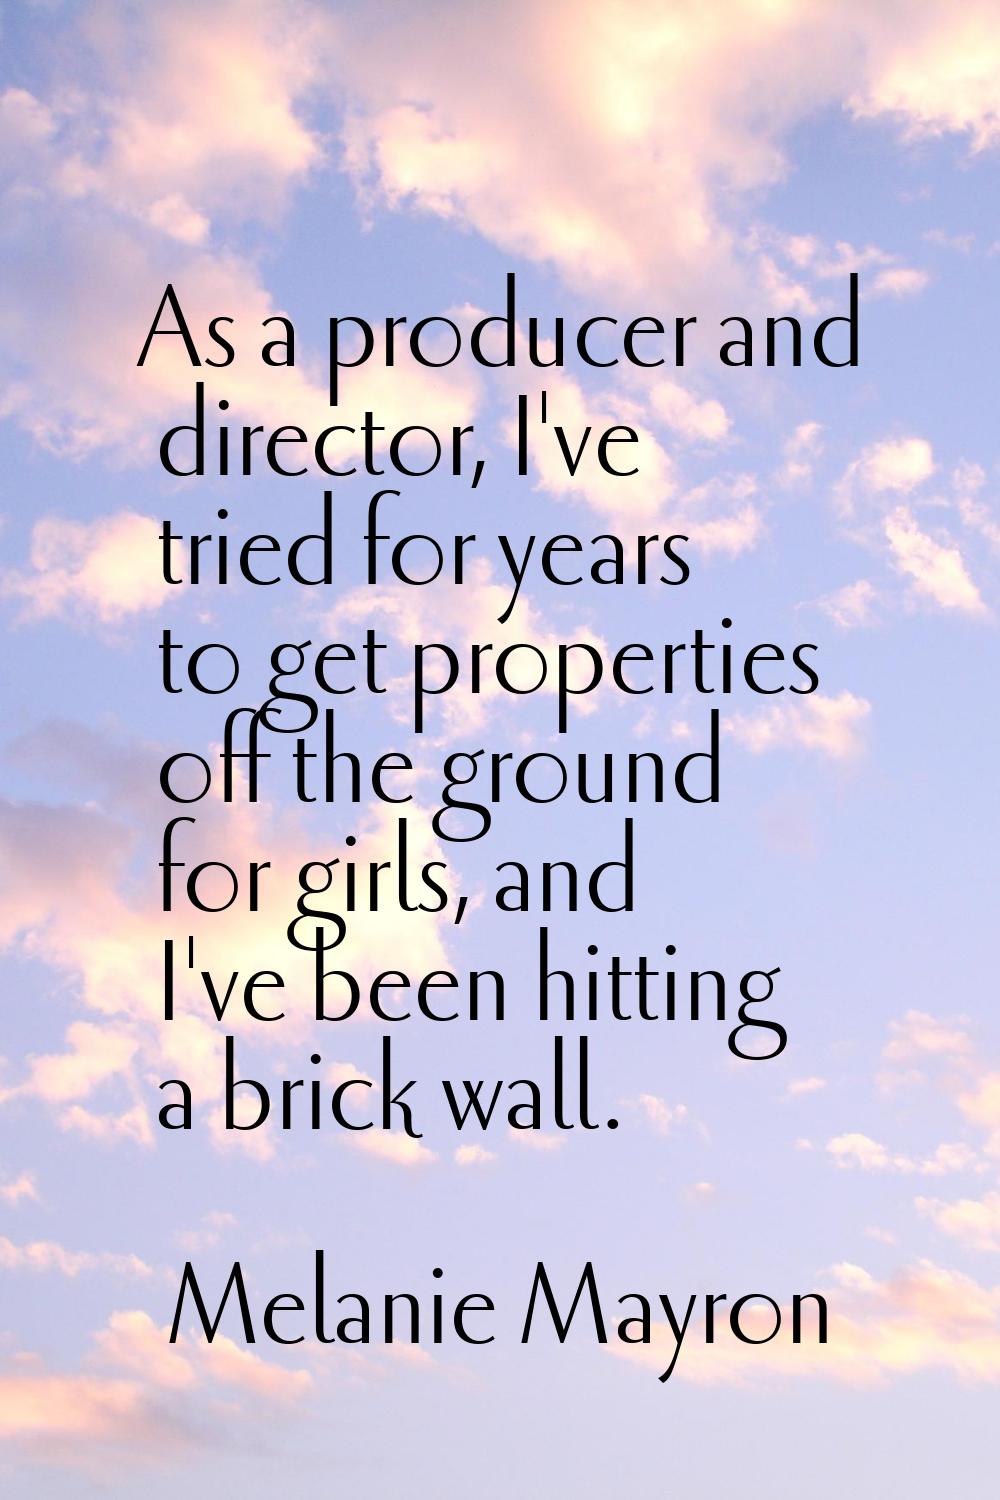 As a producer and director, I've tried for years to get properties off the ground for girls, and I'